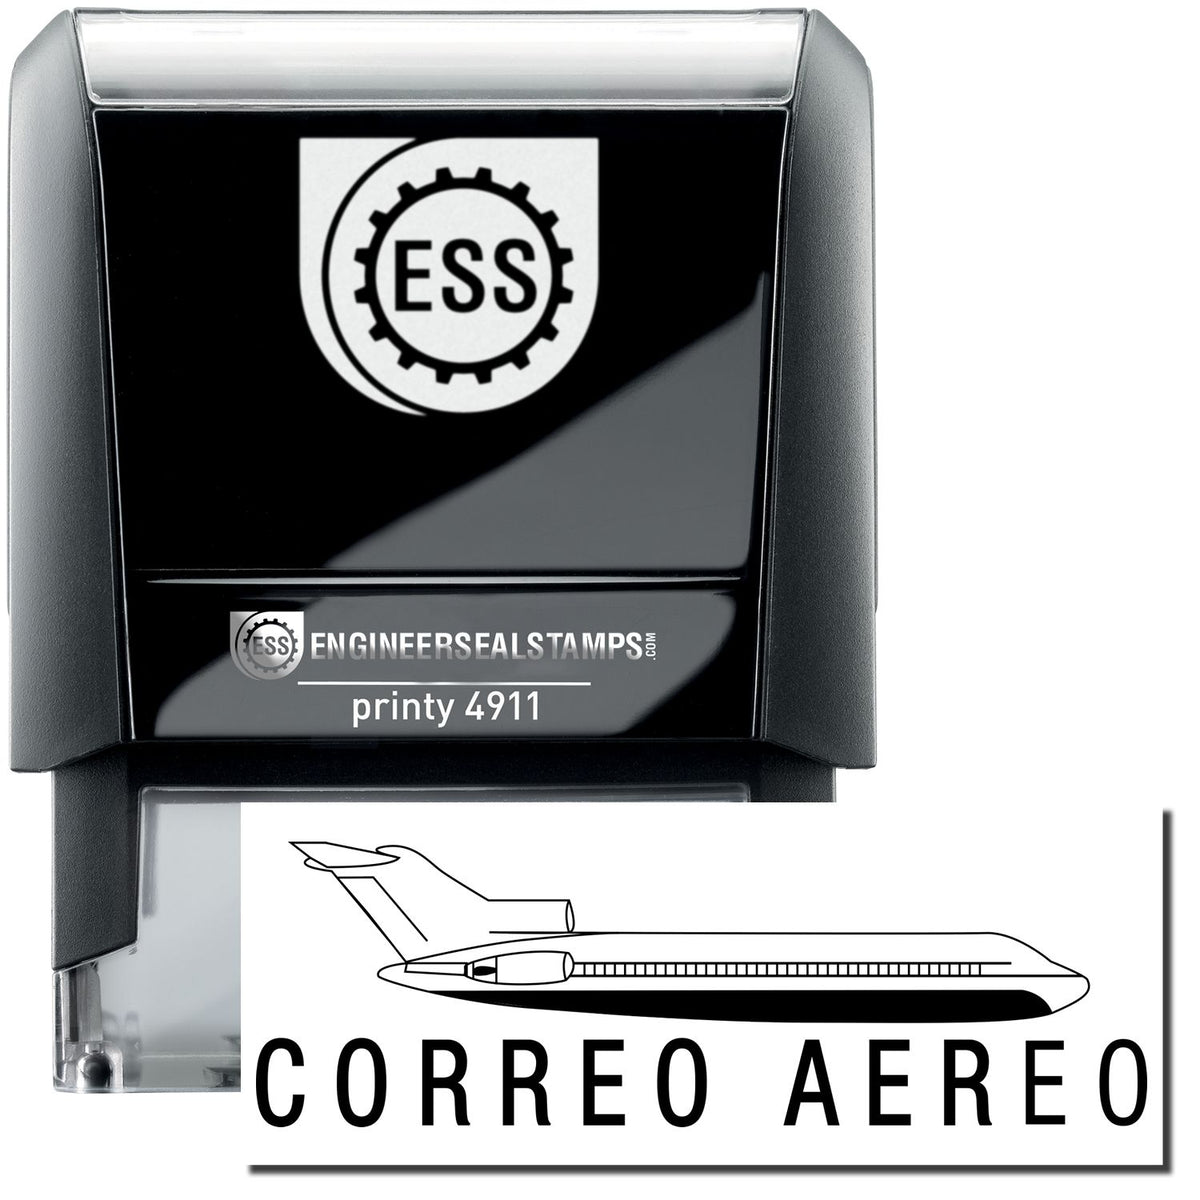 A self-inking stamp with a stamped image showing how the text &quot;CORREO AERO&quot; with an icon of an airplane above the text is displayed after stamping.